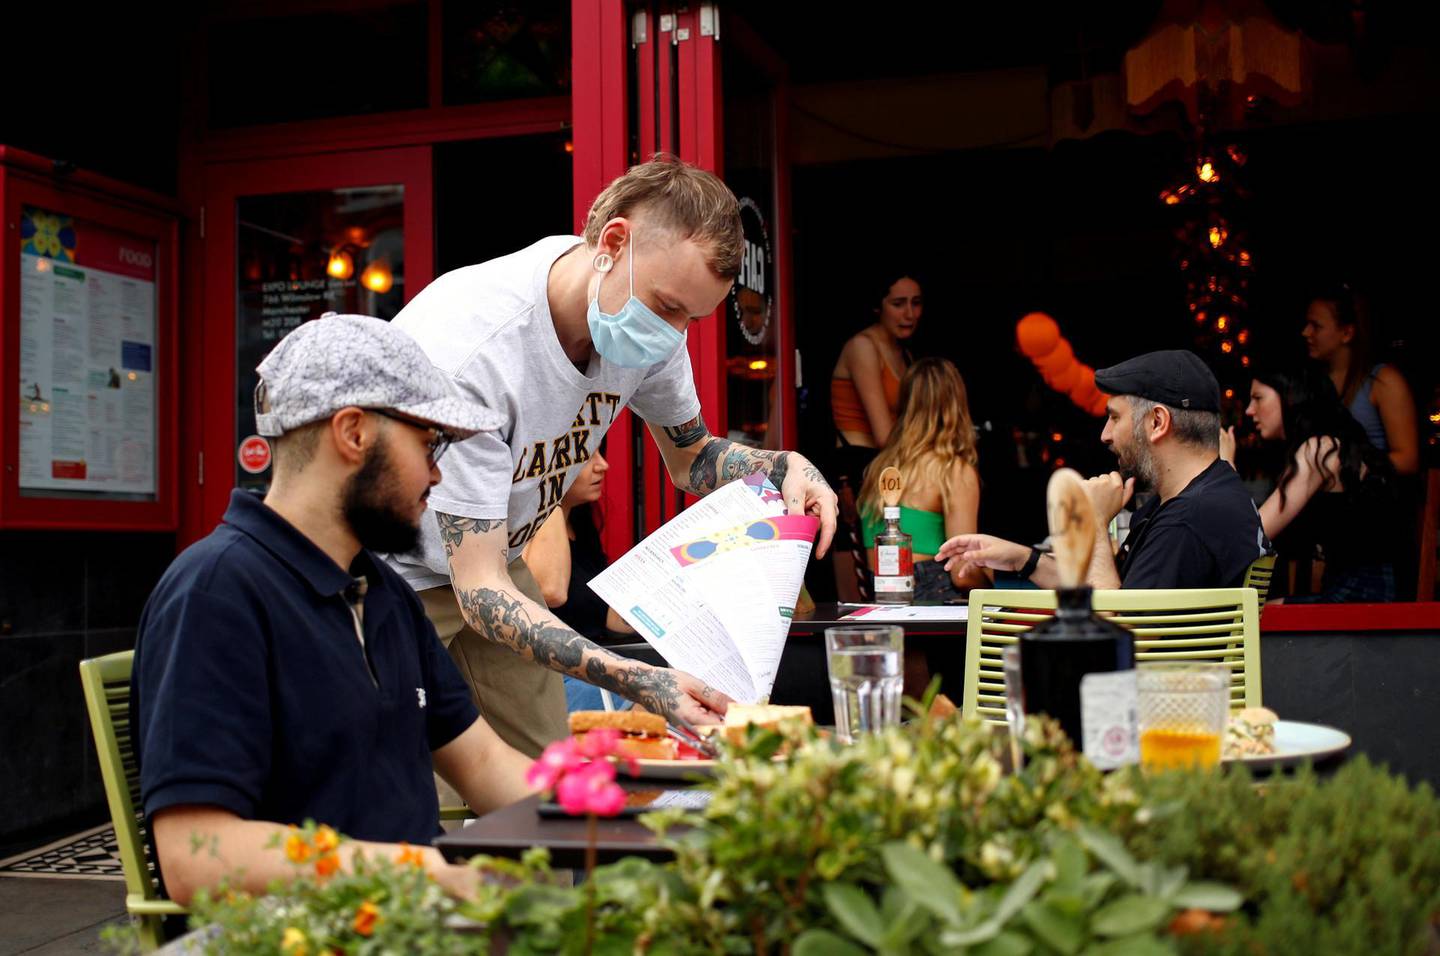 FILE PHOTO: A diner has a lunch outside a restaurant in Didsbury, as the 'Eat Out to Help Out' scheme continues, amid the coronavirus disease (COVID-19) outbreak, in Manchester, Britain, August 10, 2020.  REUTERS/Jason Cairnduff/File Photo